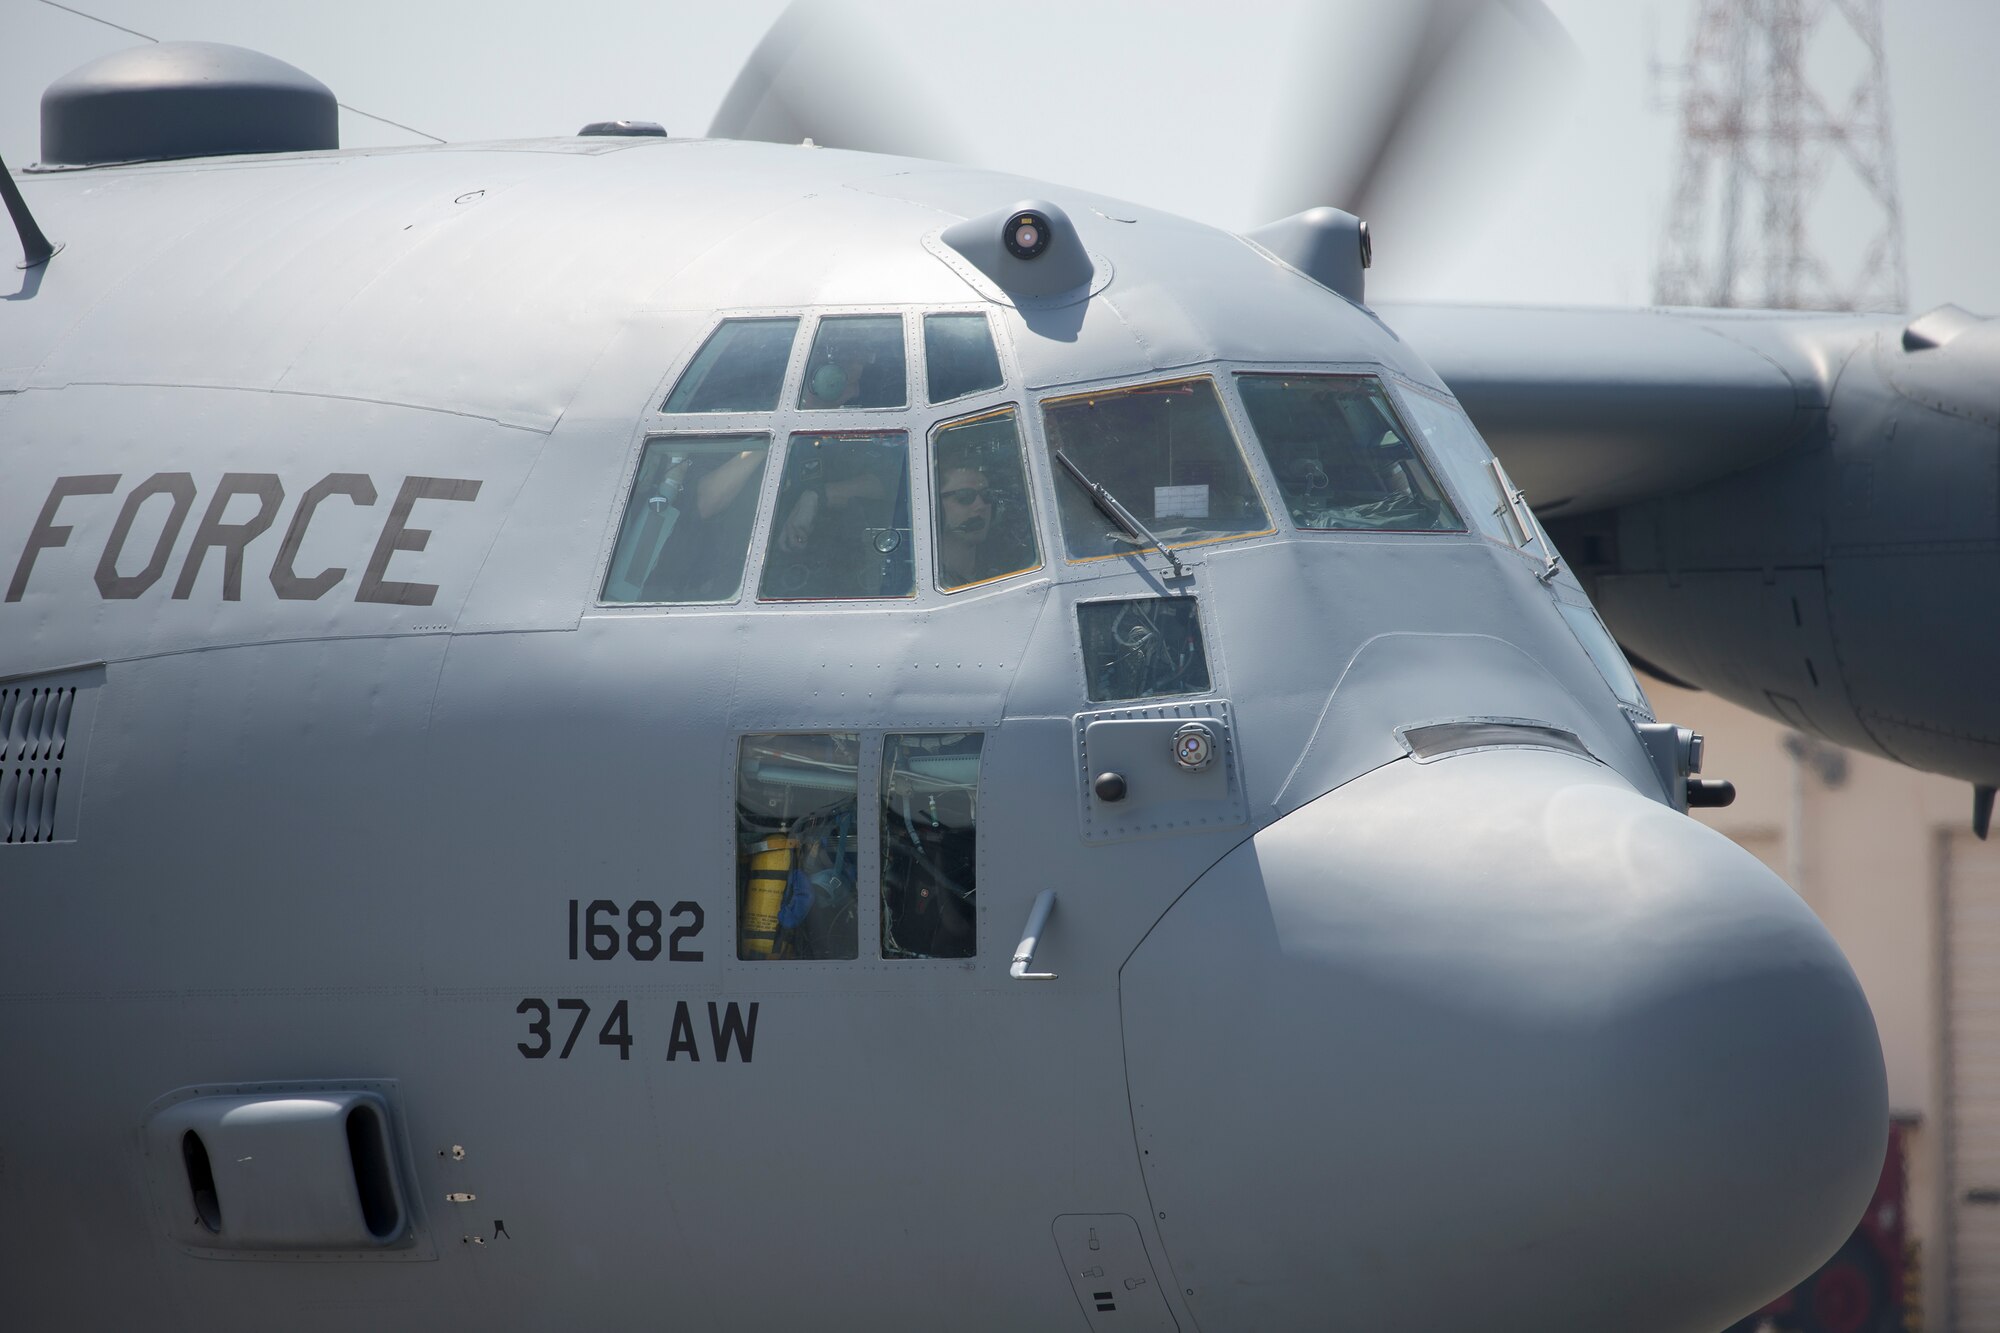 A C-130 Hercules taxis down the flightline at Yokota Air Base, Japan, April 18, 2016. The 374th Airlift Wing sent two aircraft in support of the Government of Japan in their relief efforts for the series of earthquakes that took place in the Kyushu region recently. The aircraft transported heavy vehicles and personnel from Chitose Air Base, Hokkaido to Kyushu. (U.S. Air Force photo by Yasuo Osakabe/Released)